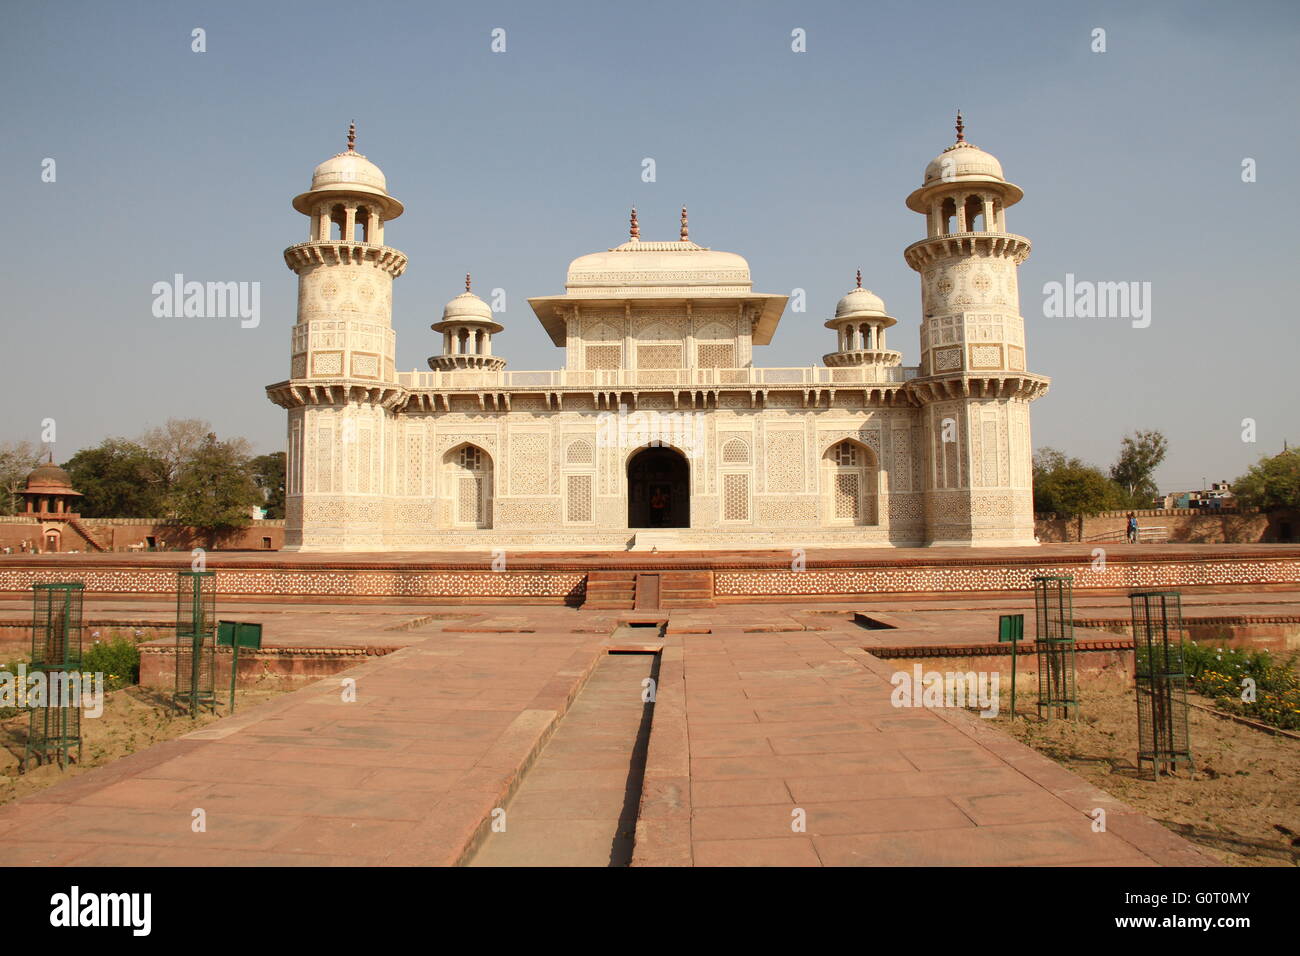 Tomb of I'timād-ud-Daulah It is a Mughal mausoleum in the city of Agra in India. It is sometimes called 'Baby Taj'. Stock Photo